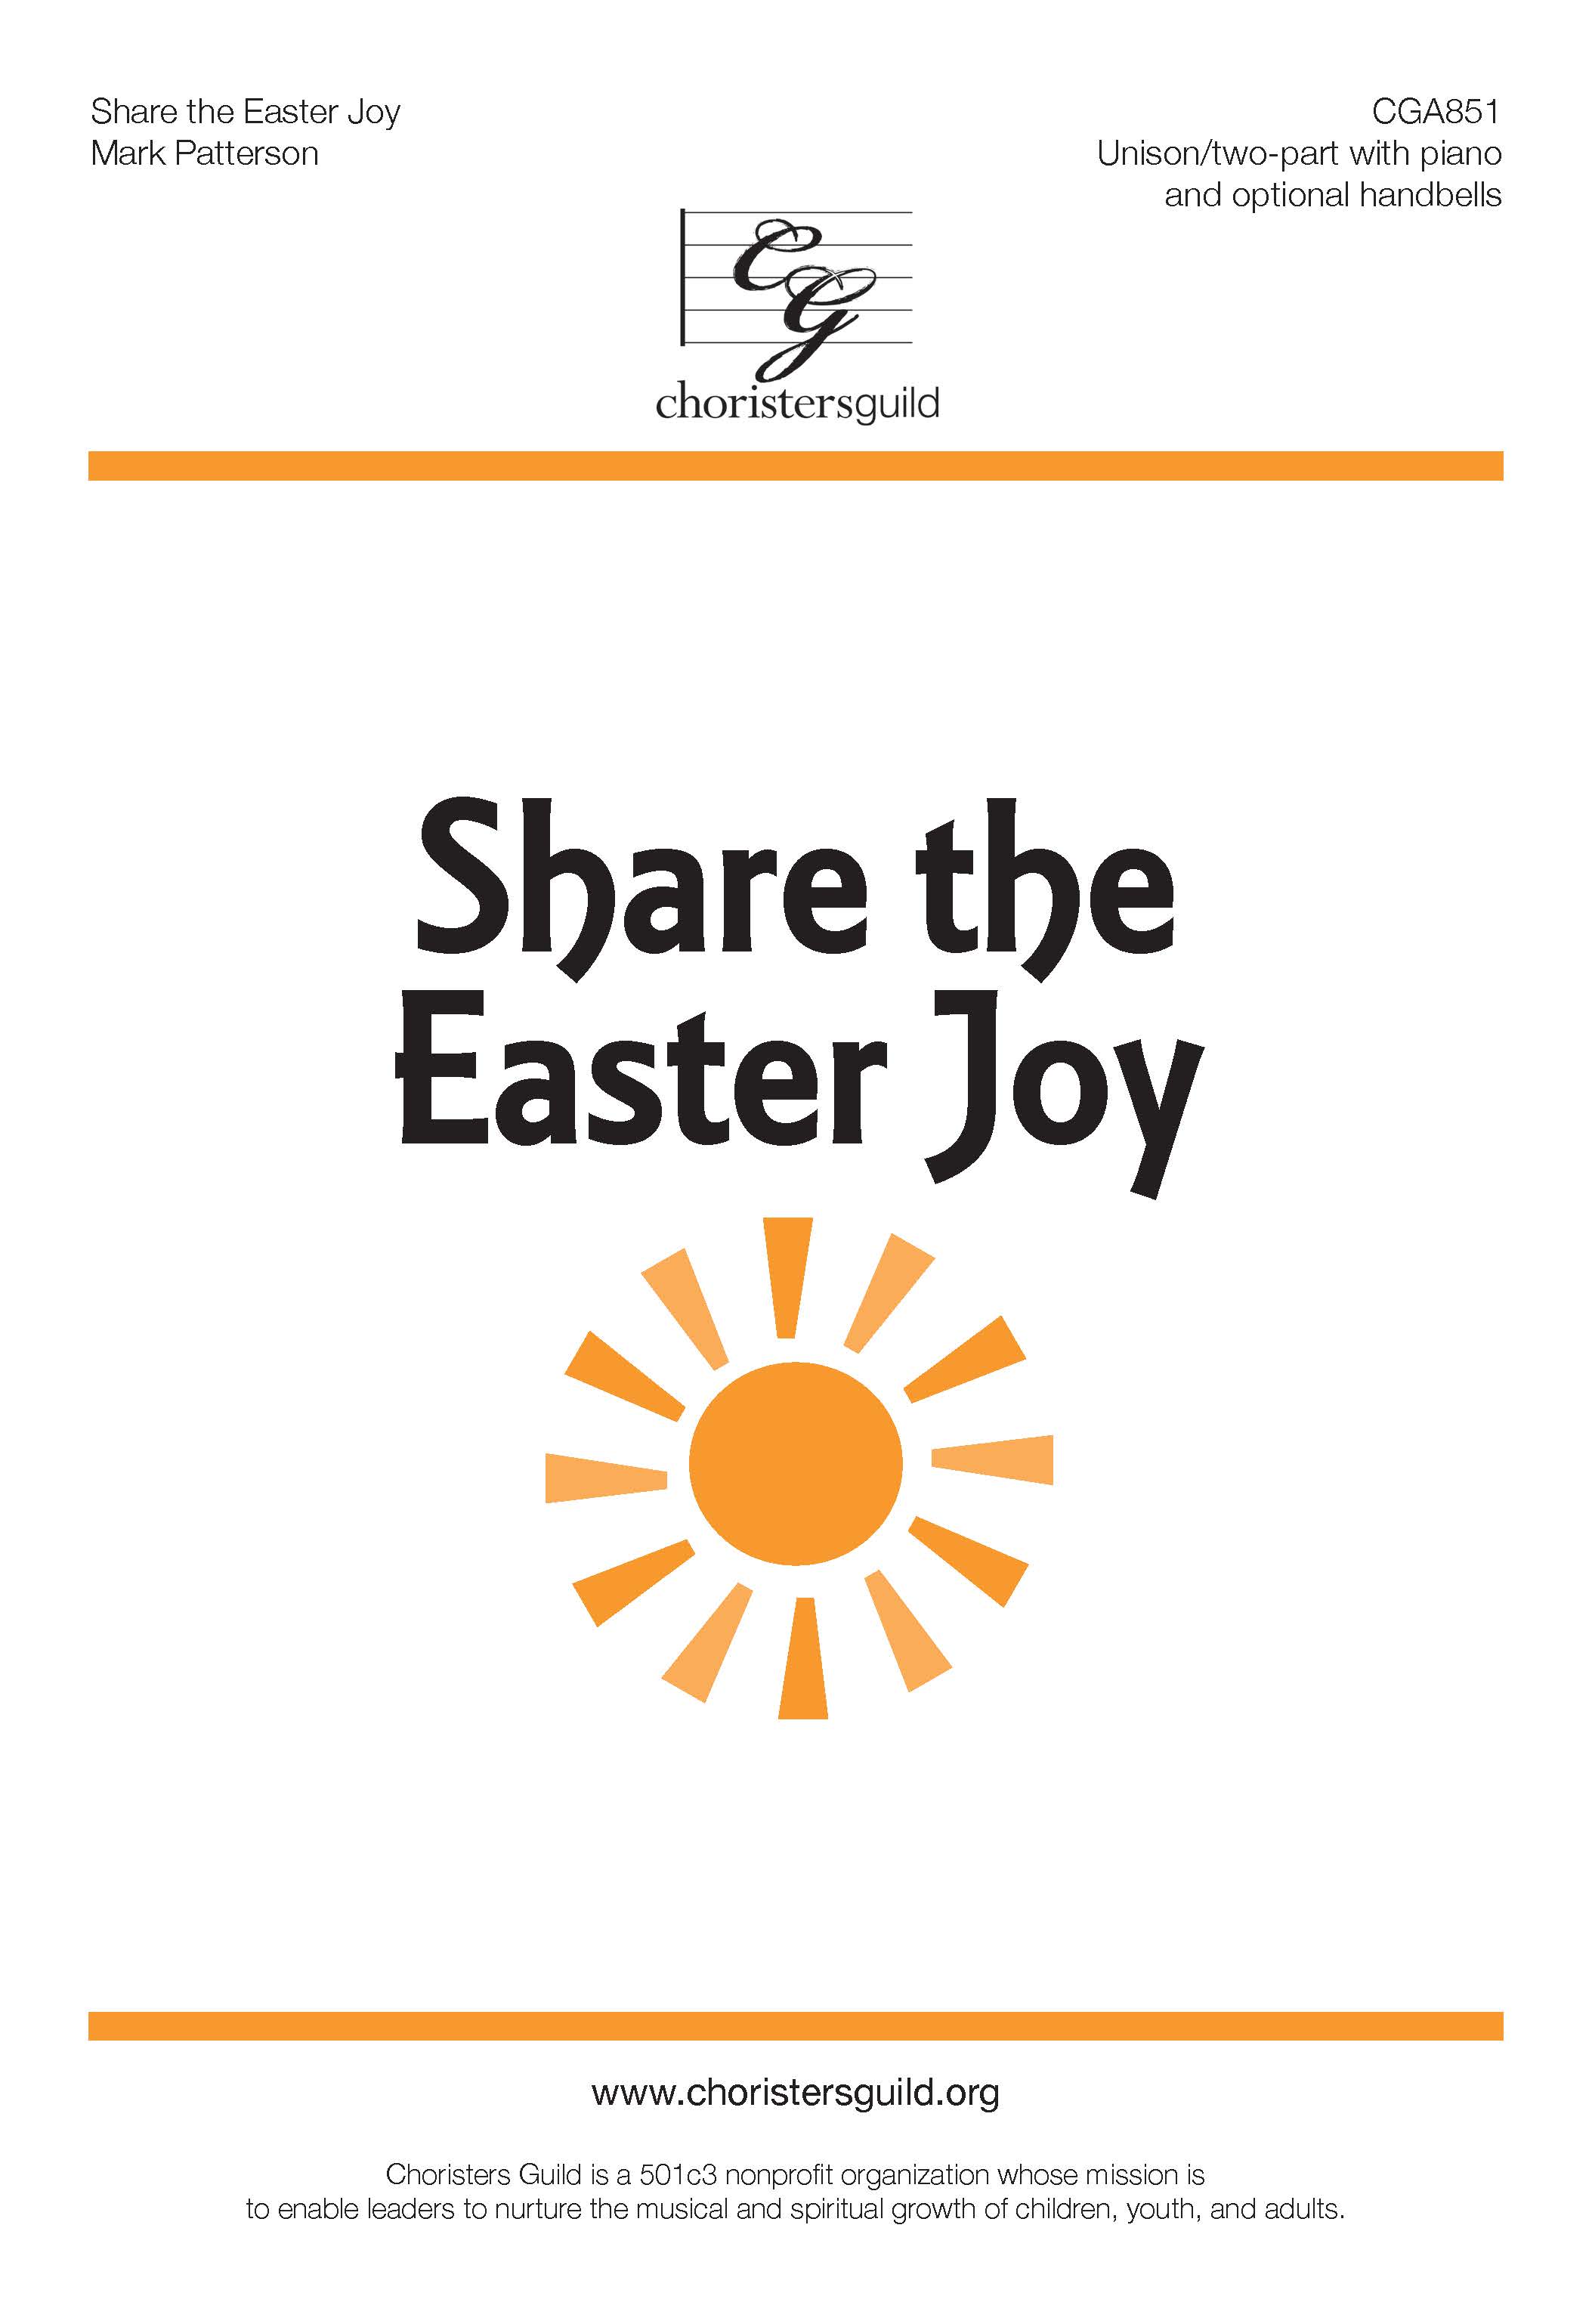 Share the Easter Joy